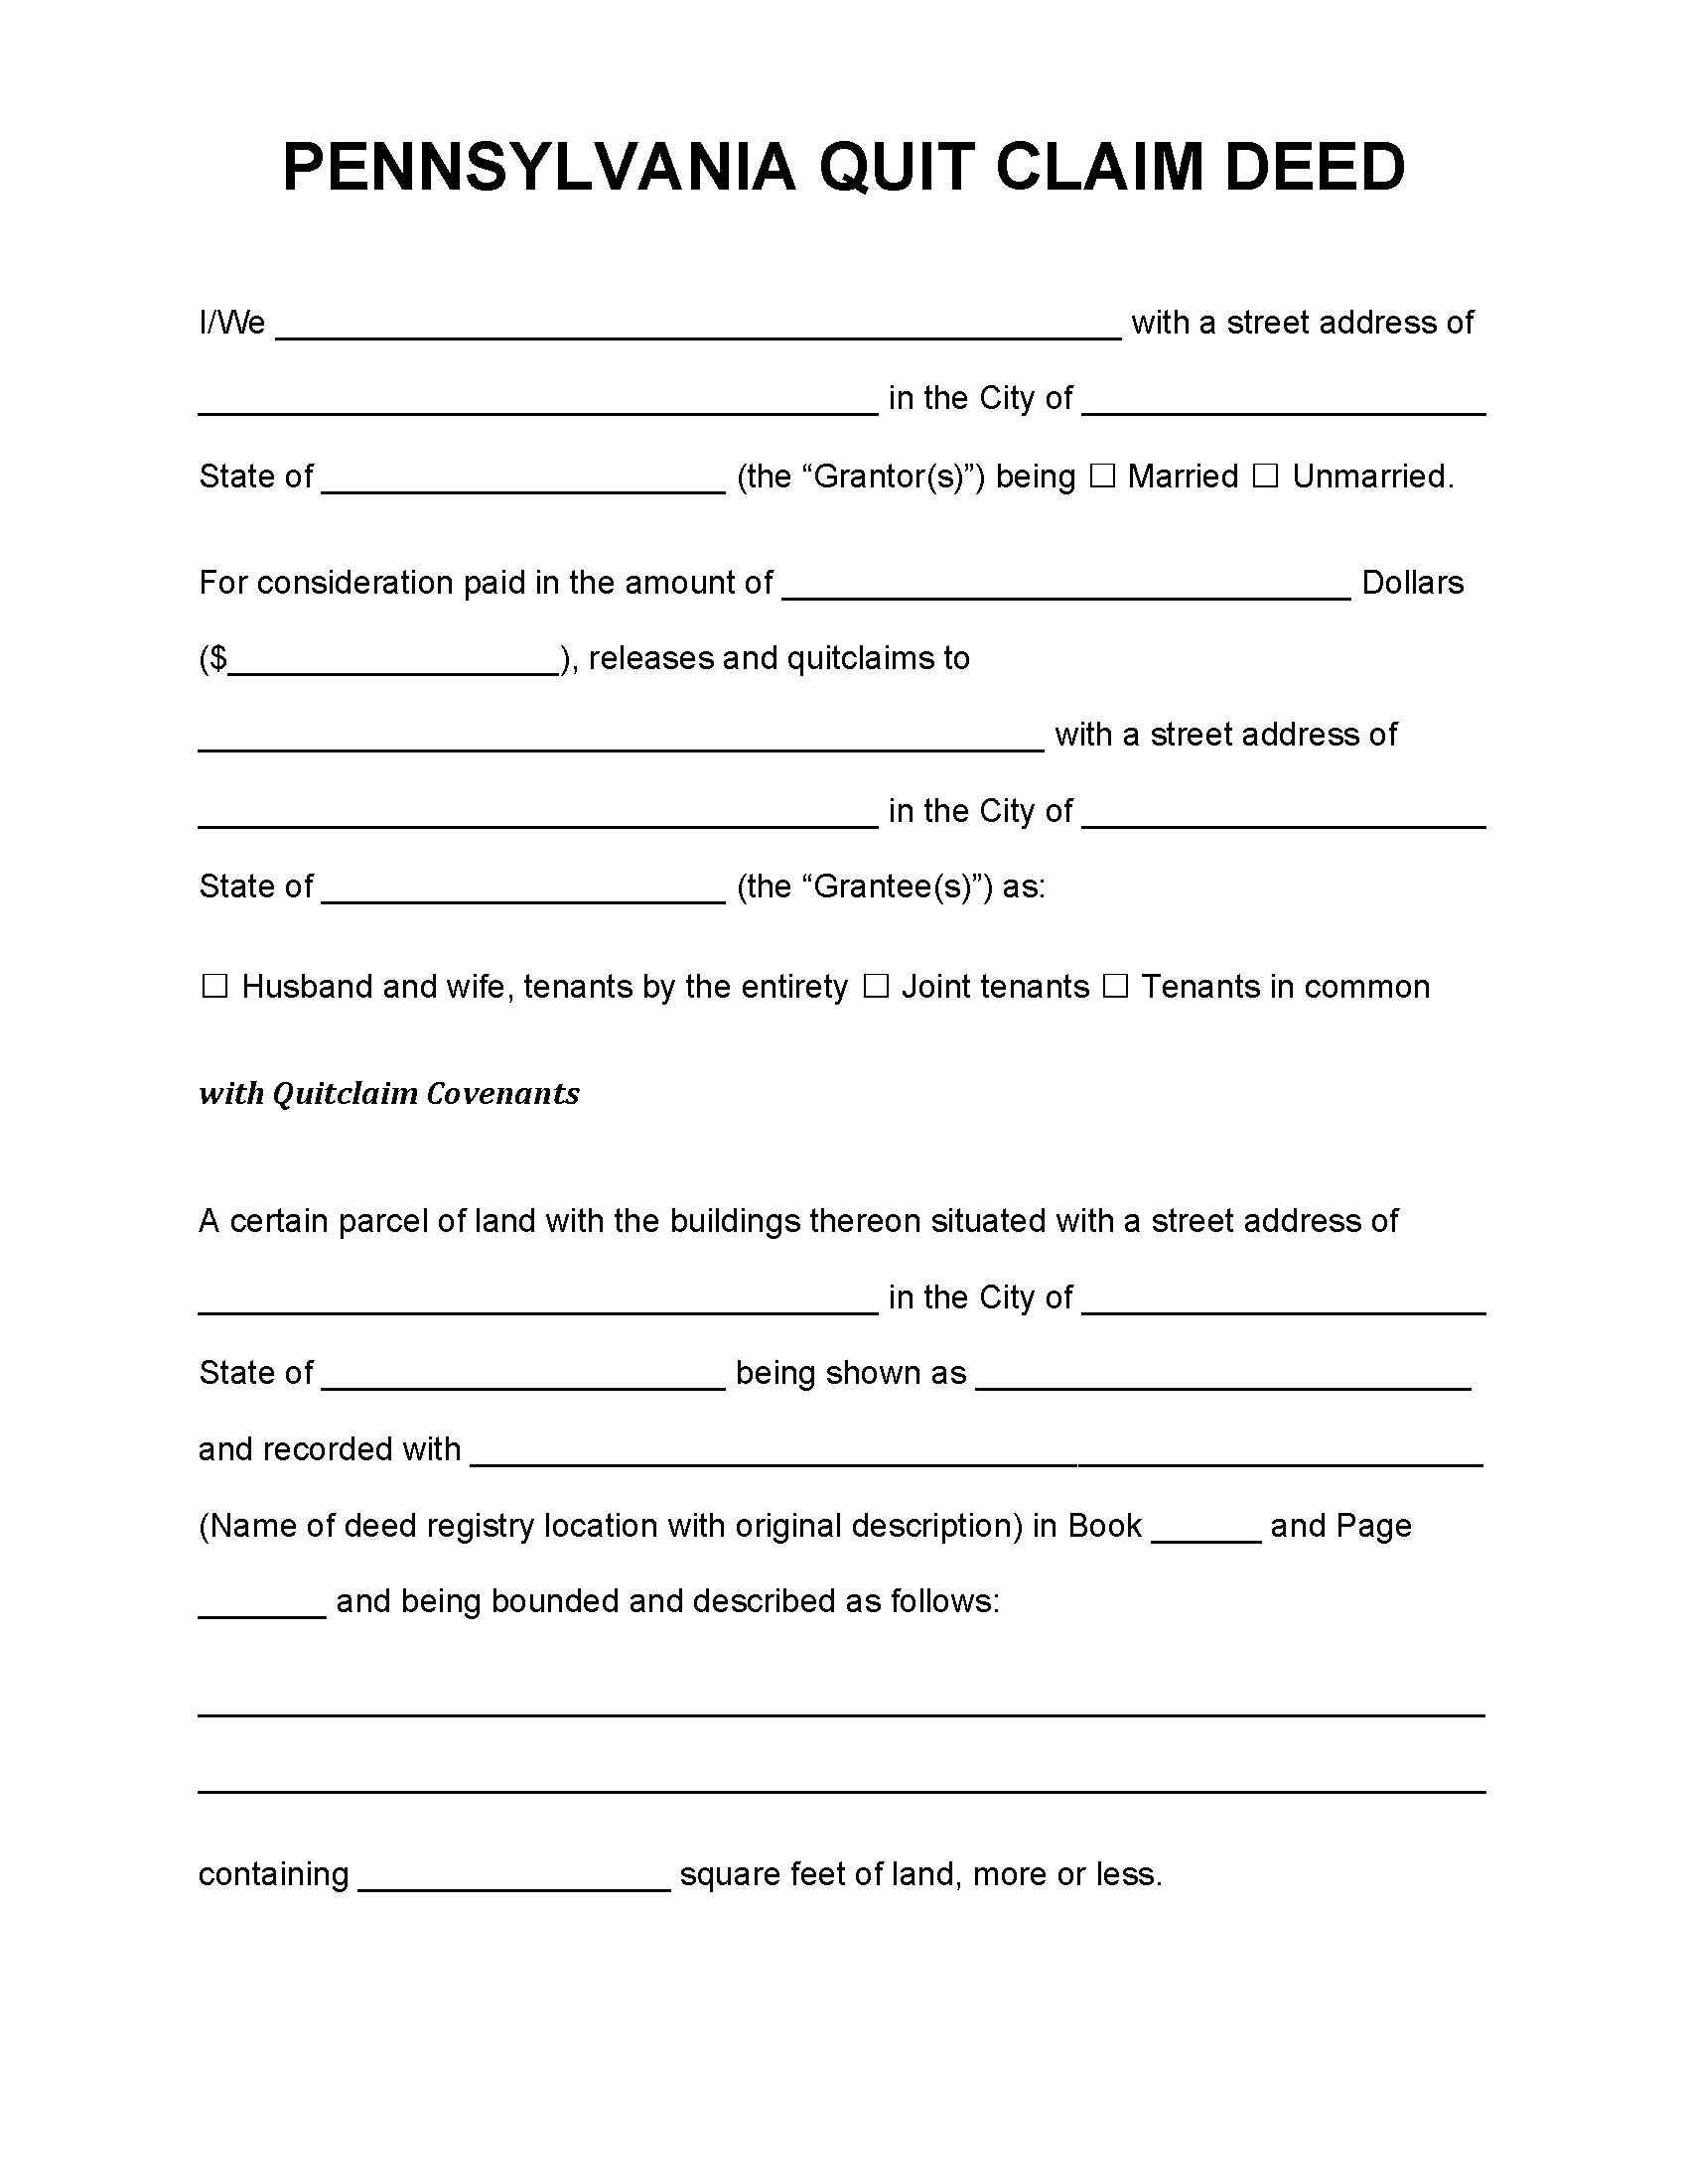 pennsylvania-quit-claim-deed-free-printable-legal-forms